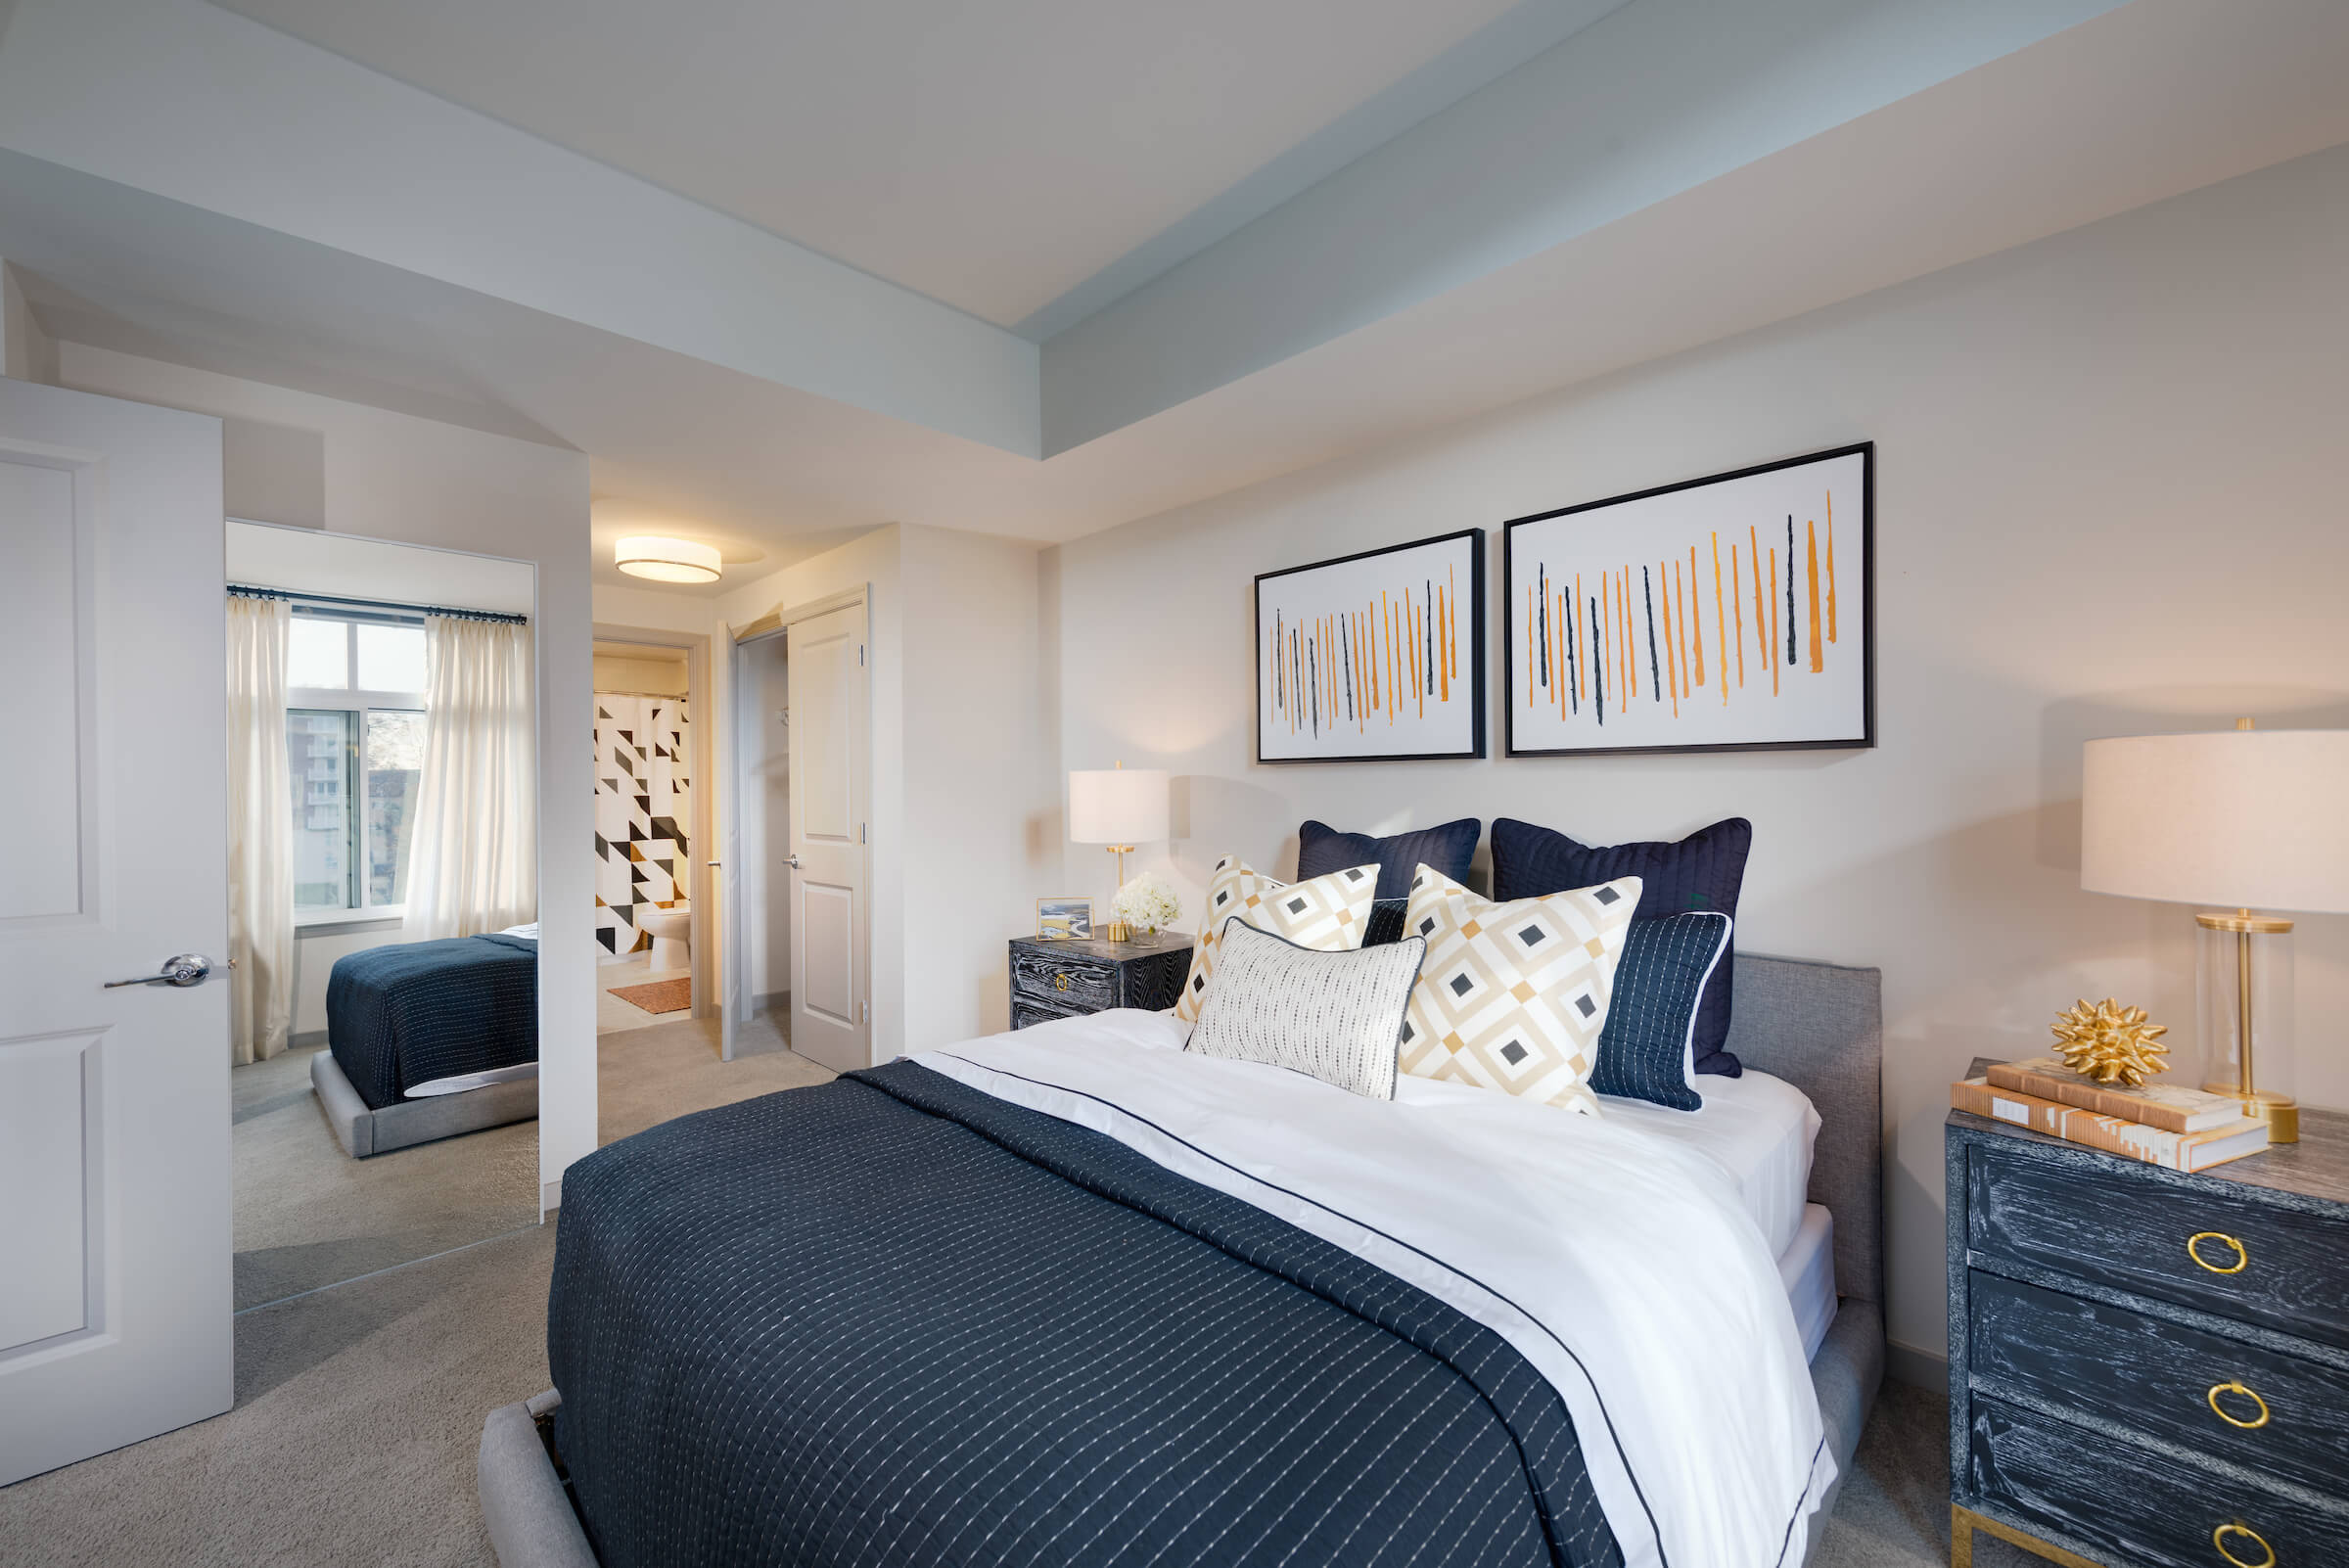 Discover tastefully appointed studio to 2-bedroom apartments at Union on Queen.